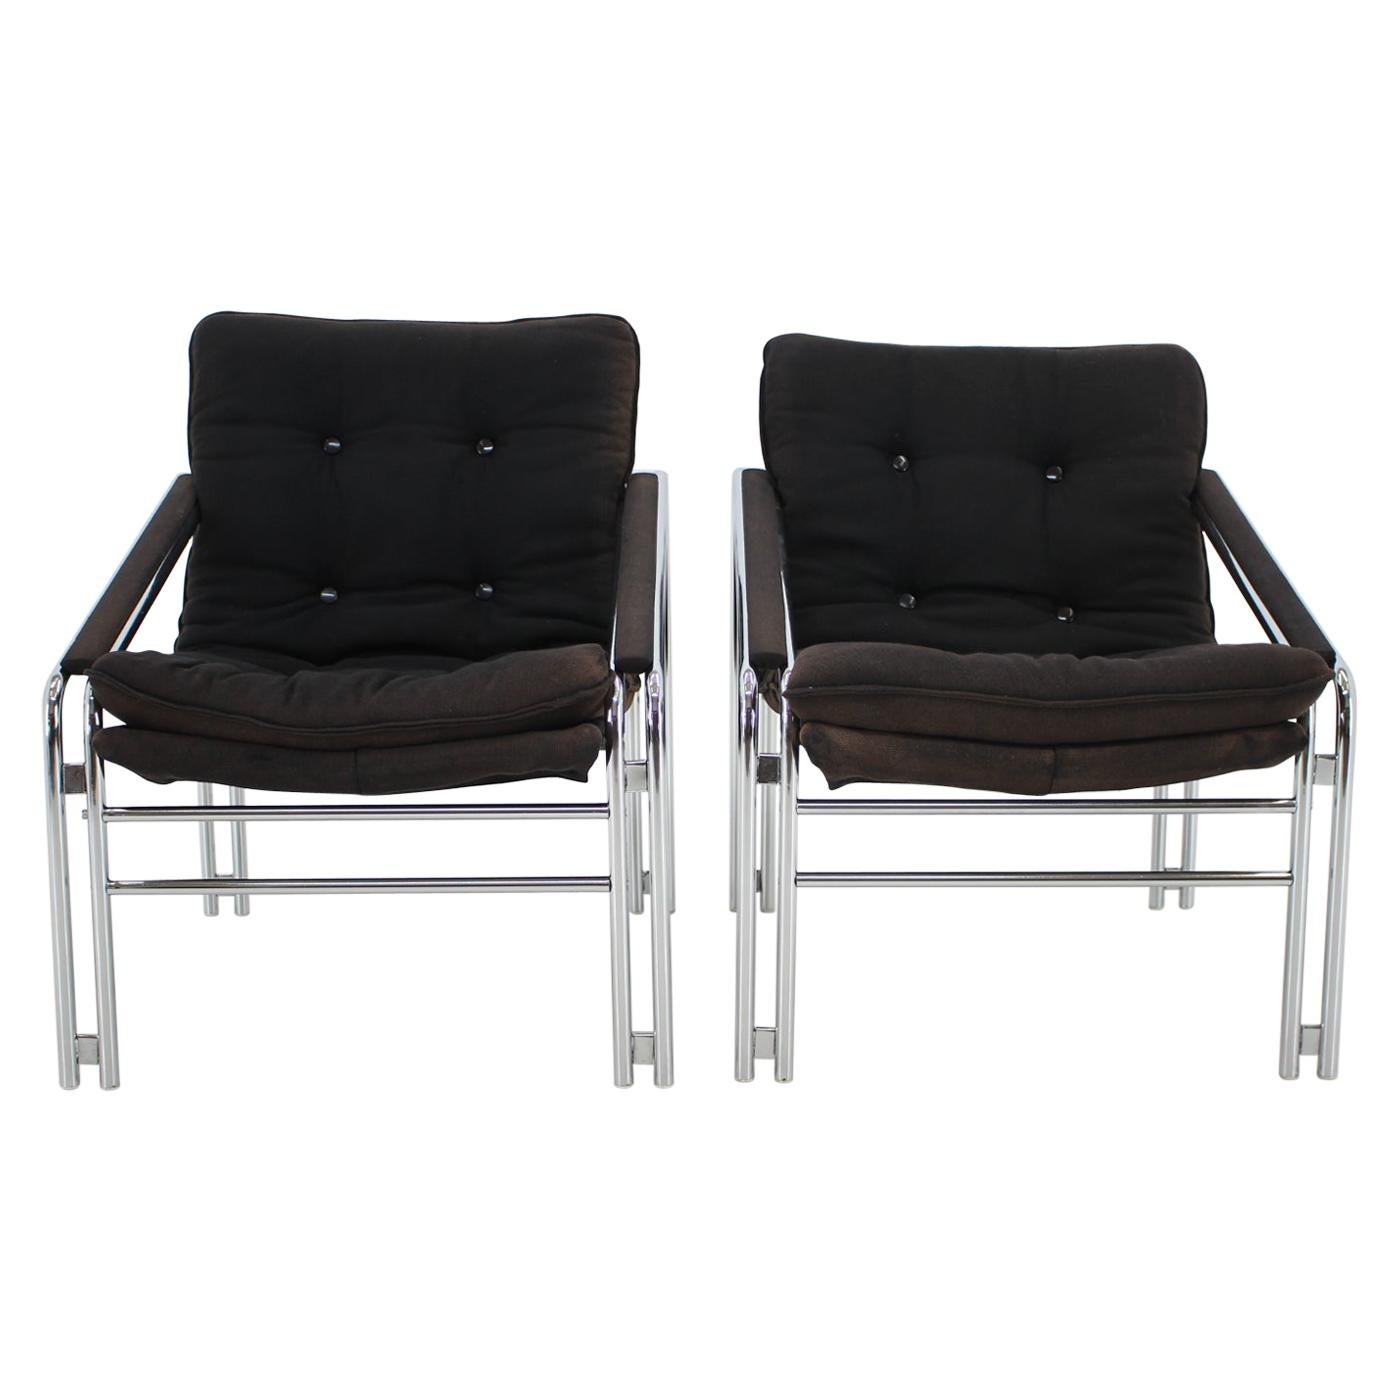 Set of Two Design Lounge Chairs, Germany